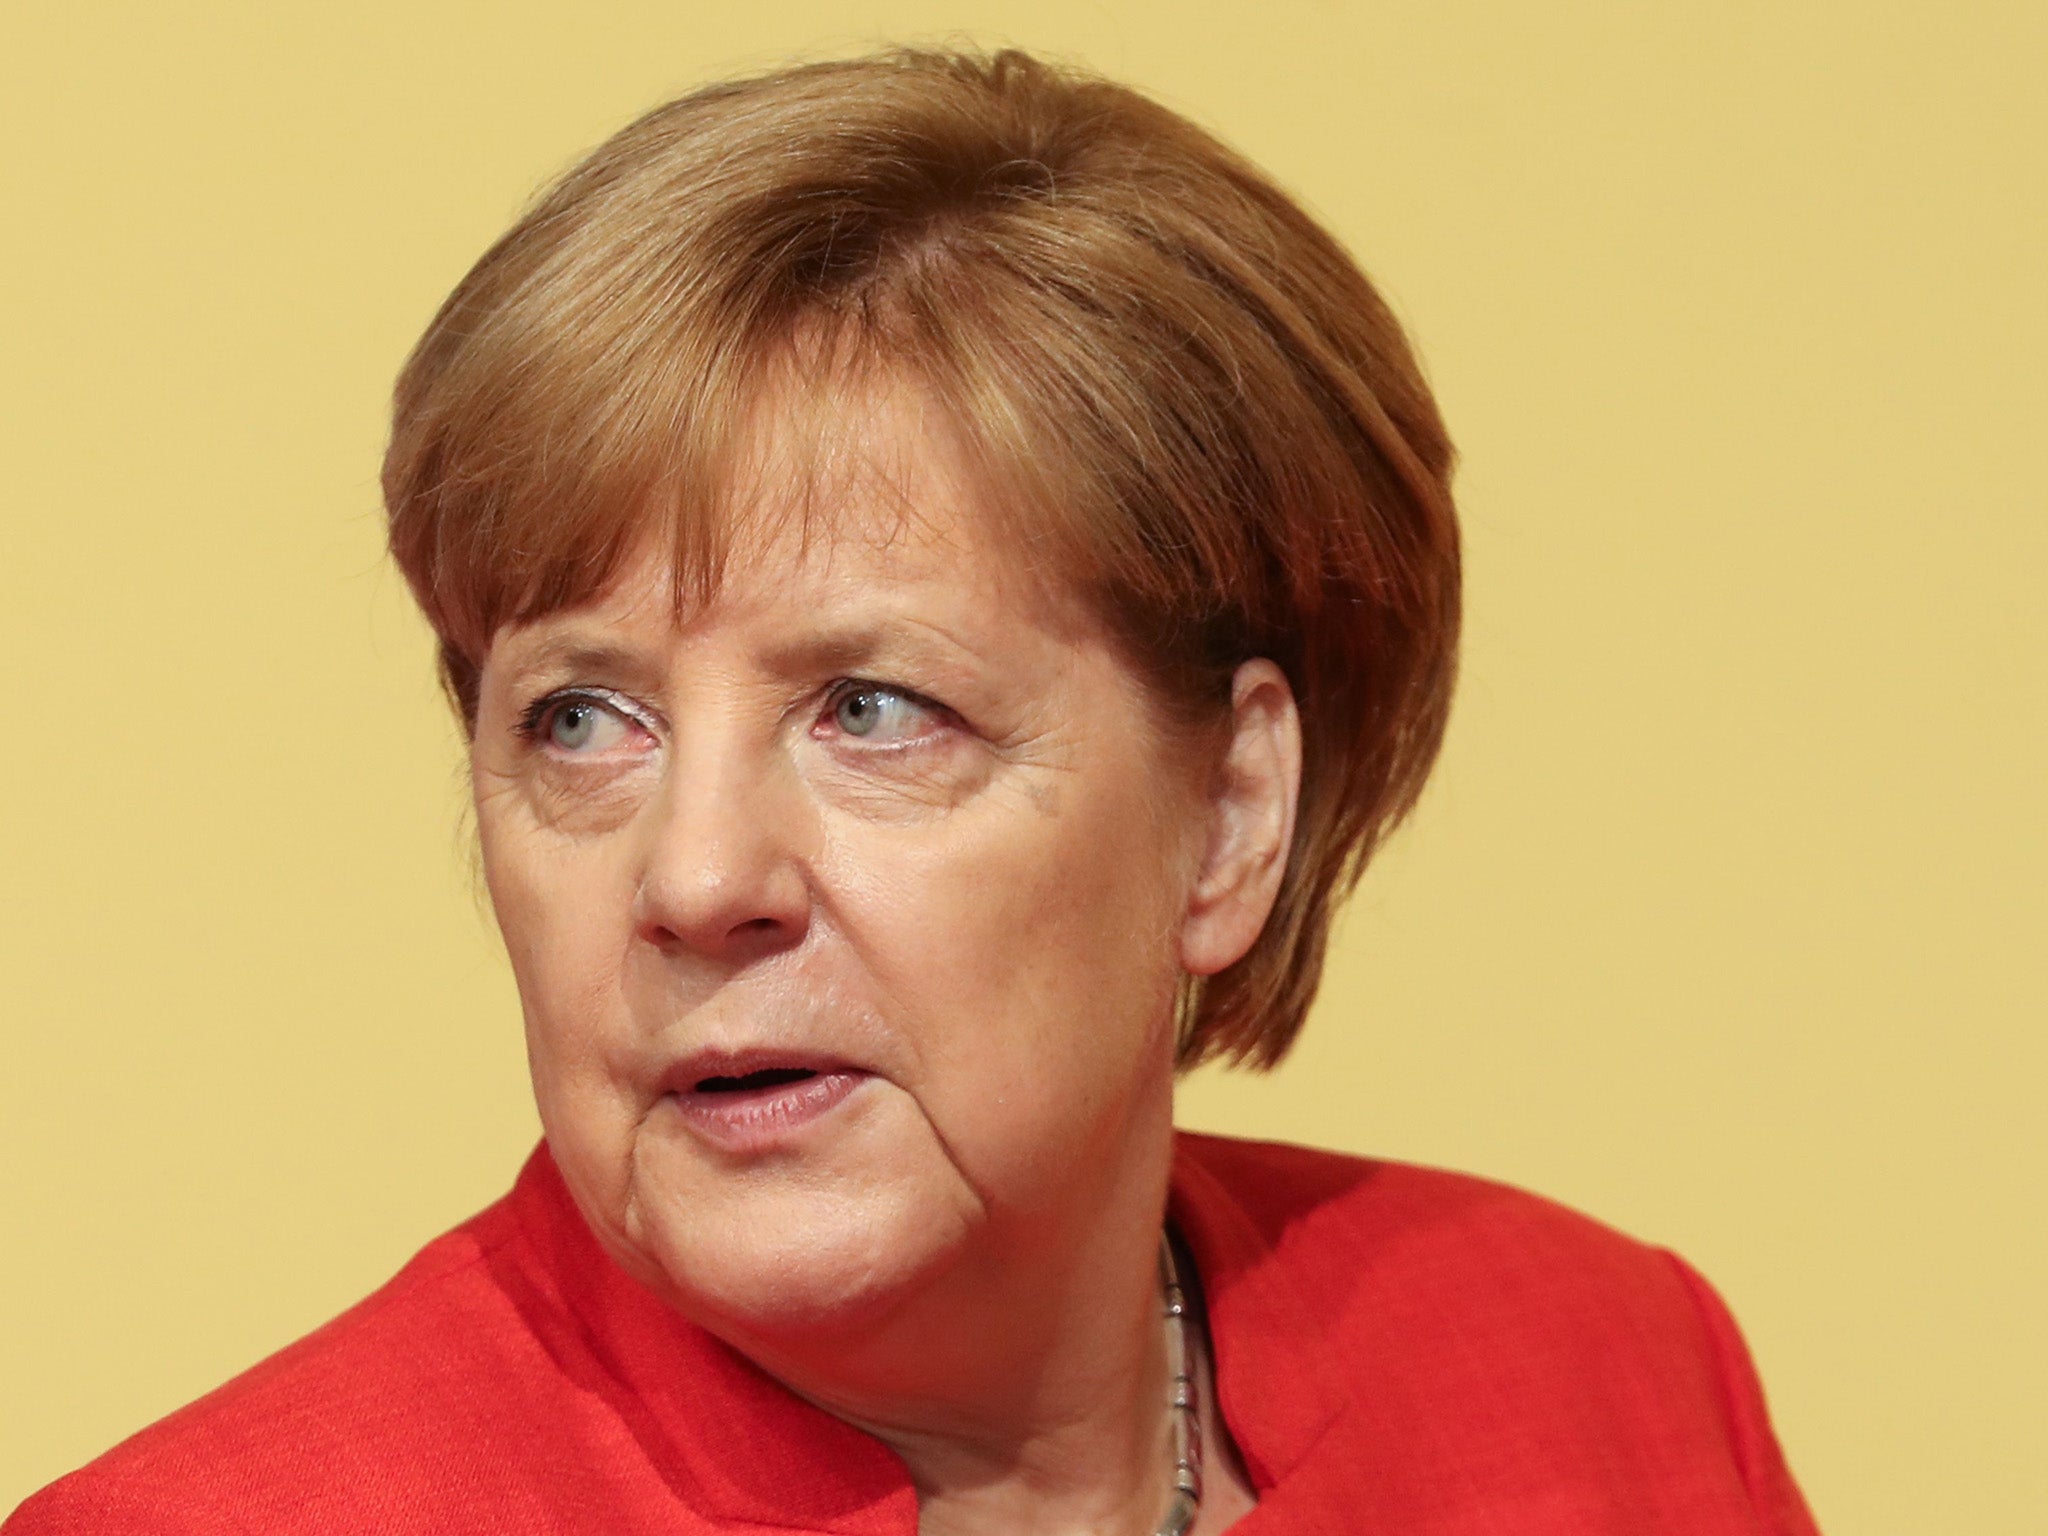 The German chancellor faces mounting pressure from her traditional allies